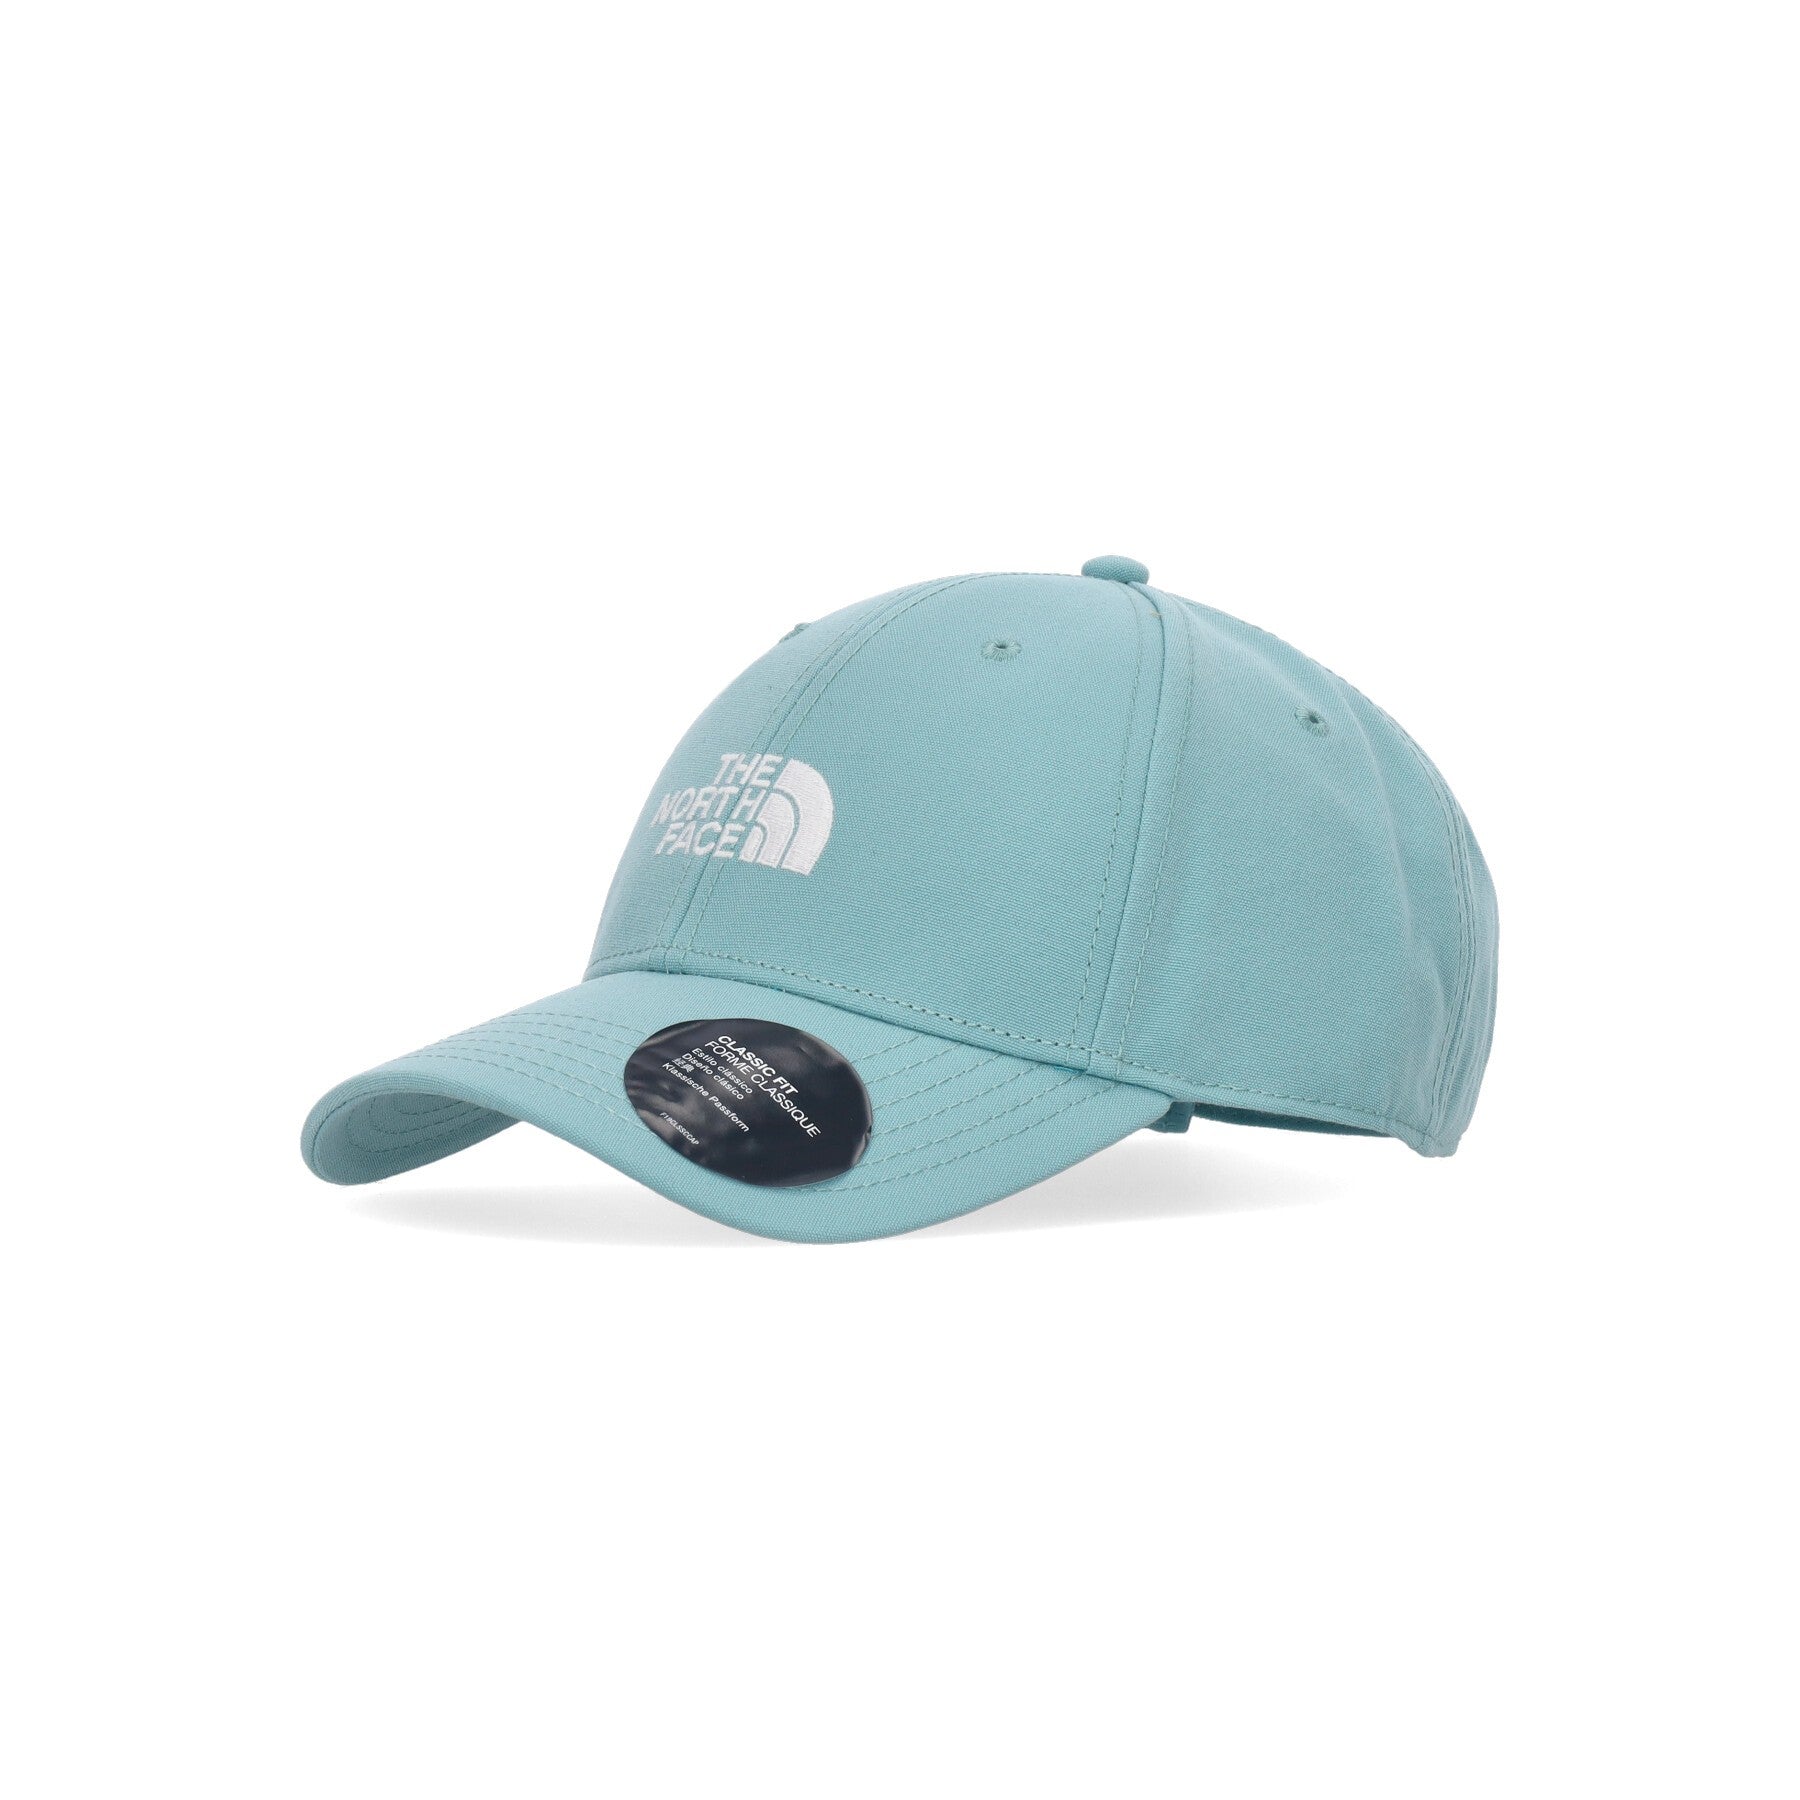 The North Face, Cappellino Visiera Curva Uomo Recycled 66 Classic Hat, Reef Waters